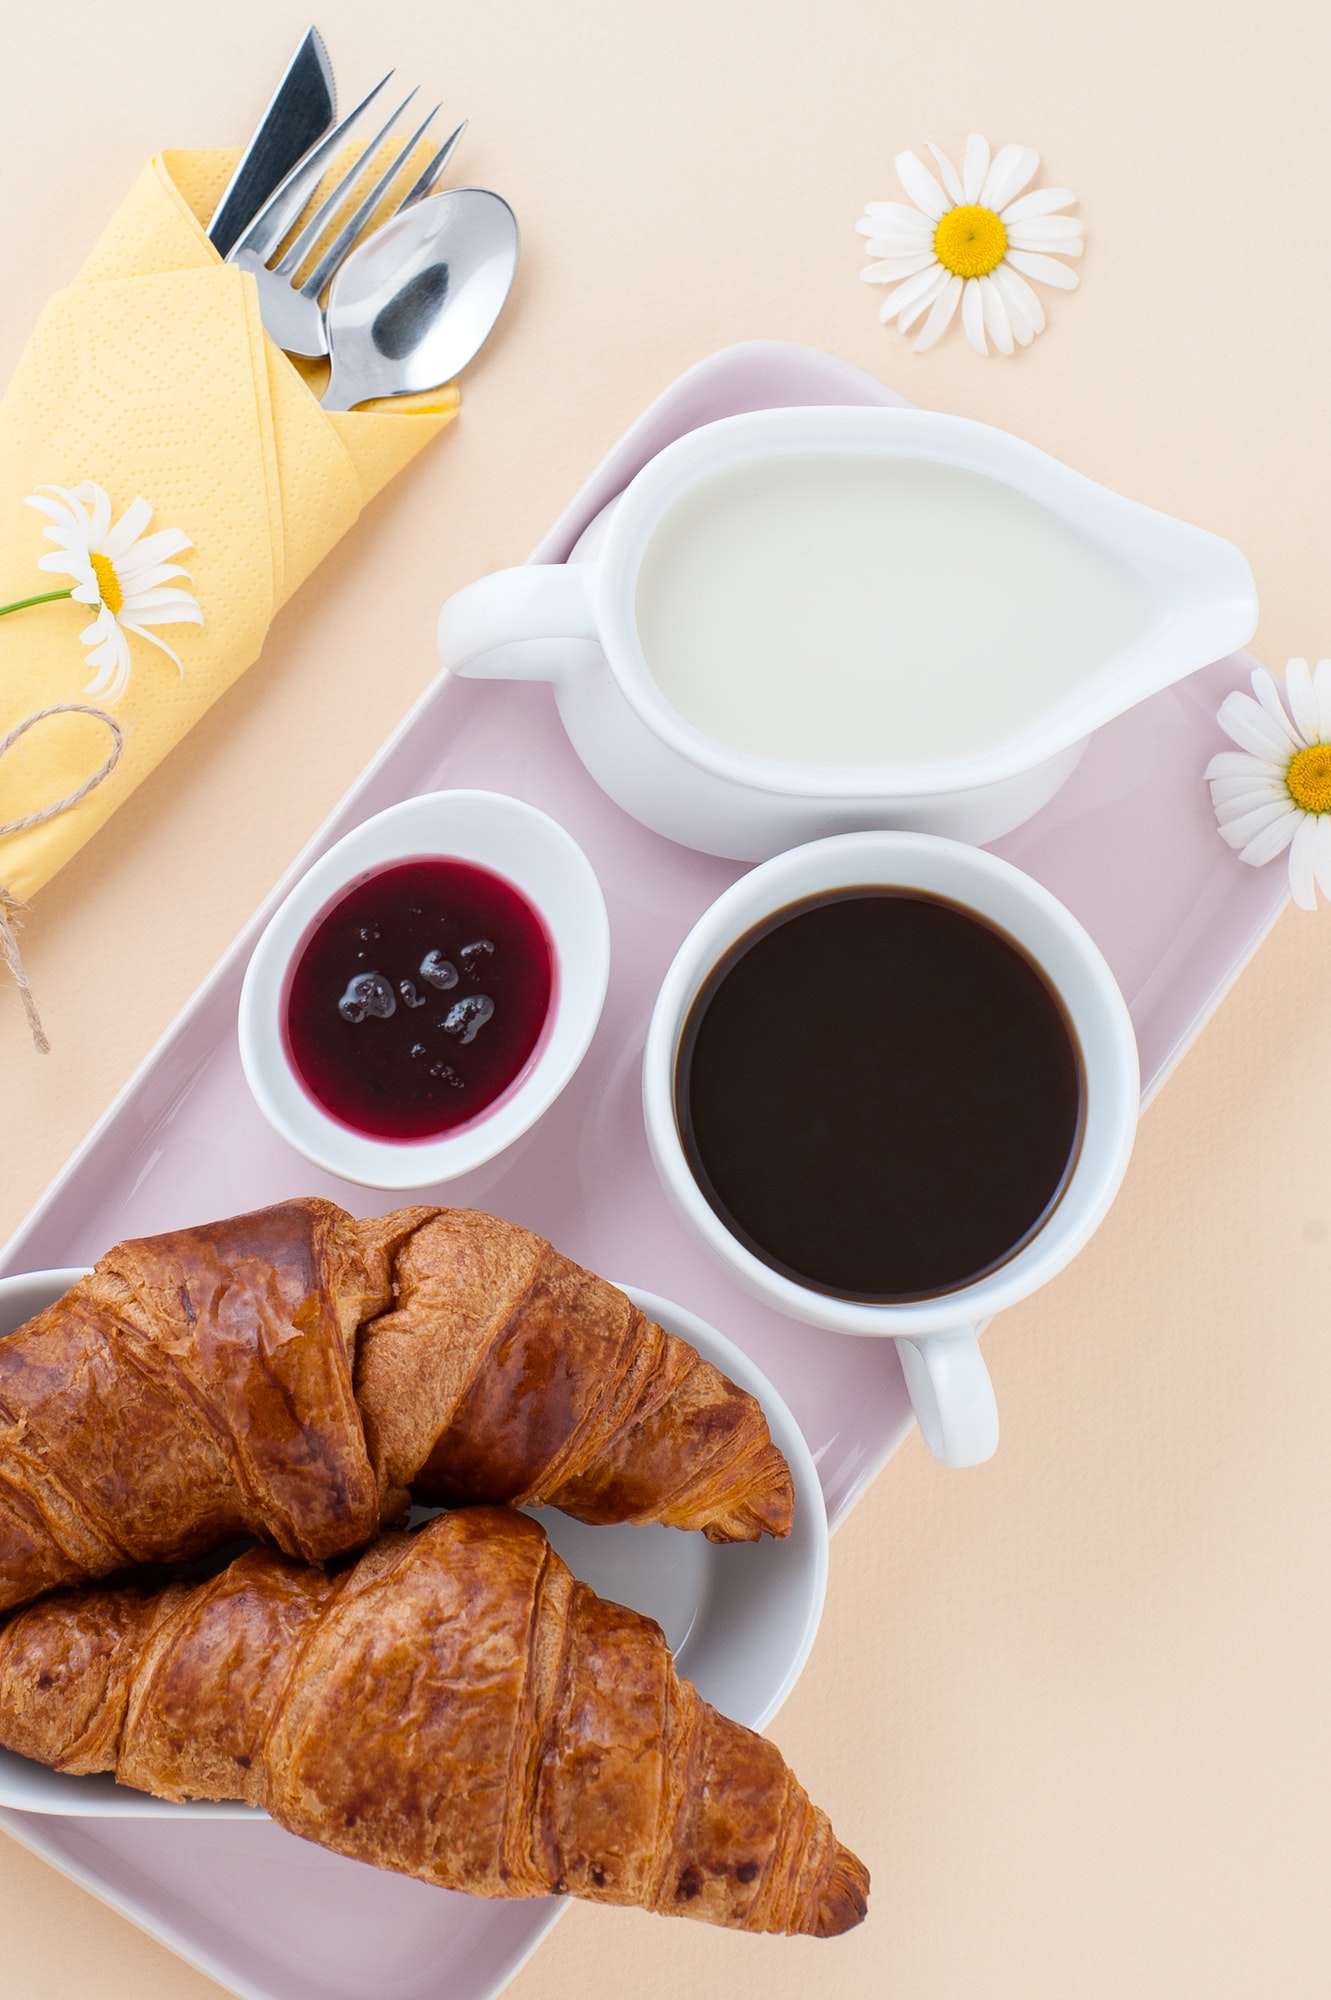 Breakfast consisting of black coffee, milk and a croissant with